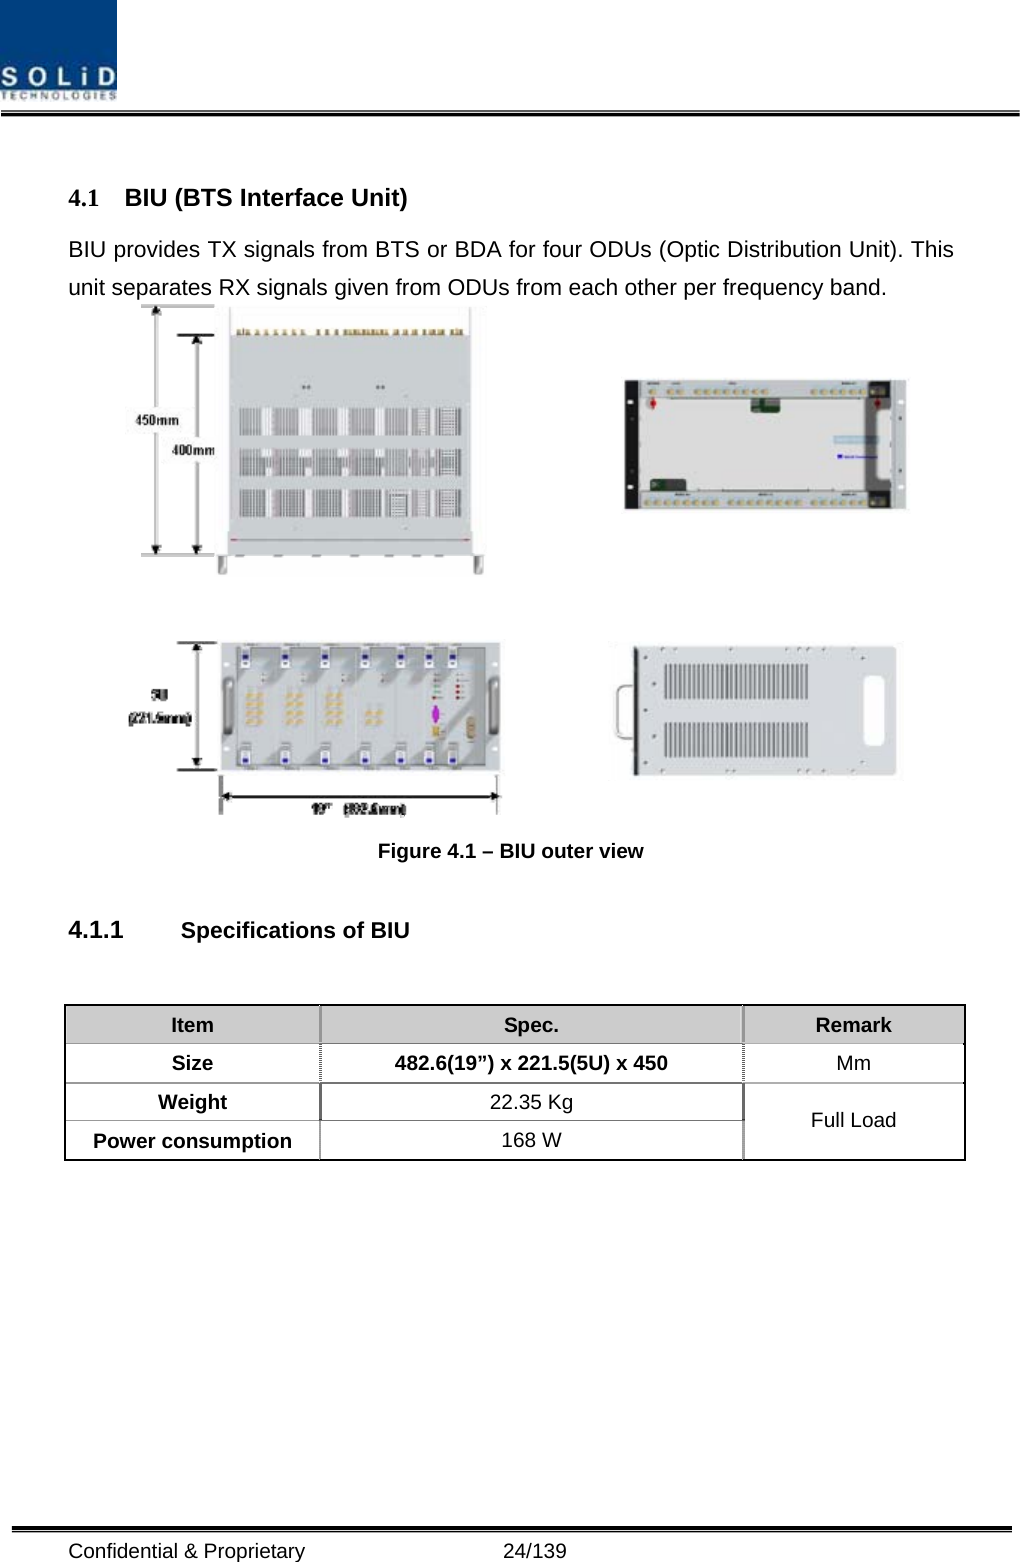  Confidential &amp; Proprietary                   24/139  4.1  BIU (BTS Interface Unit) BIU provides TX signals from BTS or BDA for four ODUs (Optic Distribution Unit). This unit separates RX signals given from ODUs from each other per frequency band.    Figure 4.1 – BIU outer view  4.1.1  Specifications of BIU   Item  Spec.  Remark Size  482.6(19”) x 221.5(5U) x 450 Mm Weight  22.35 Kg Power consumption  168 W  Full Load 